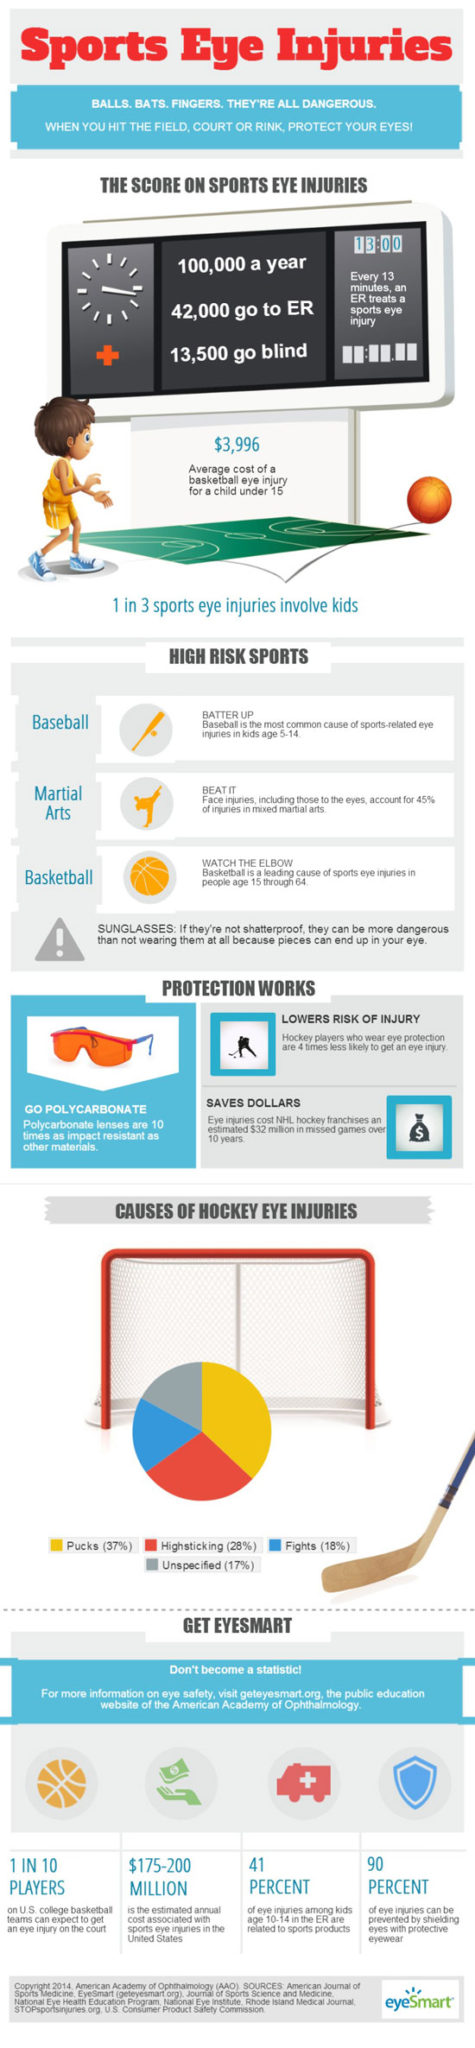 Sports-Eye-Injuries-Infographic-March-2014-550px_1 (1)